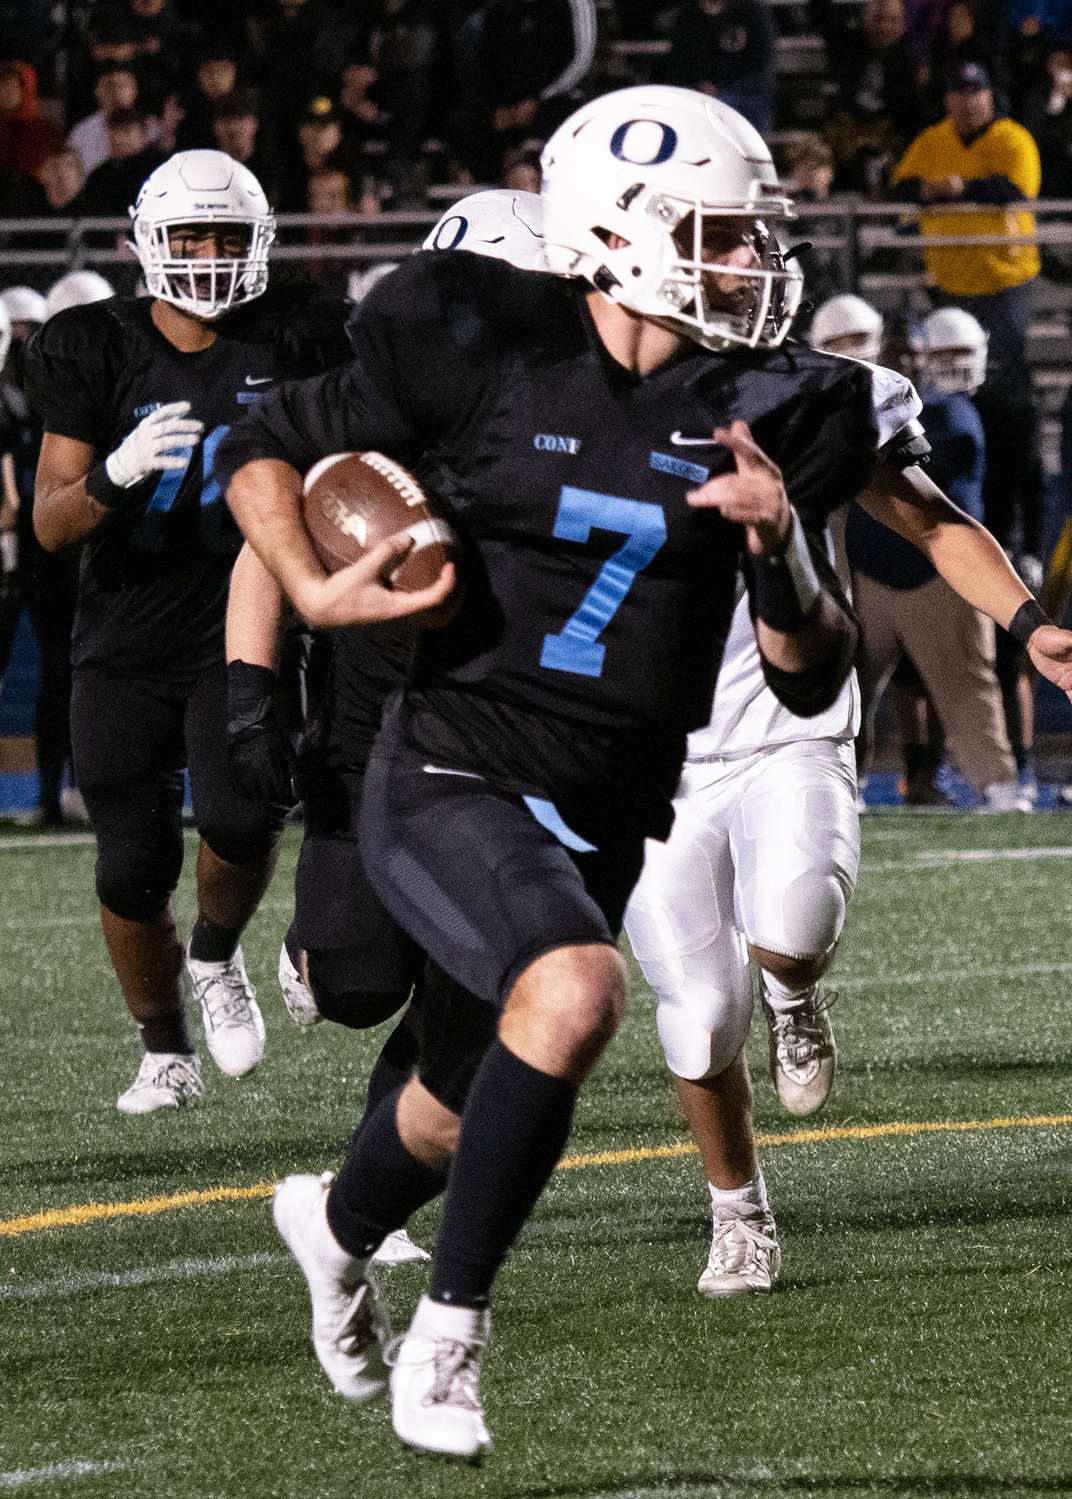 Oceanside quarterback Charlie McKee's legs inflicted plenty of damage last Friday night as the Sailors cruised into the Nassau Conference I title game by beating Syosset.